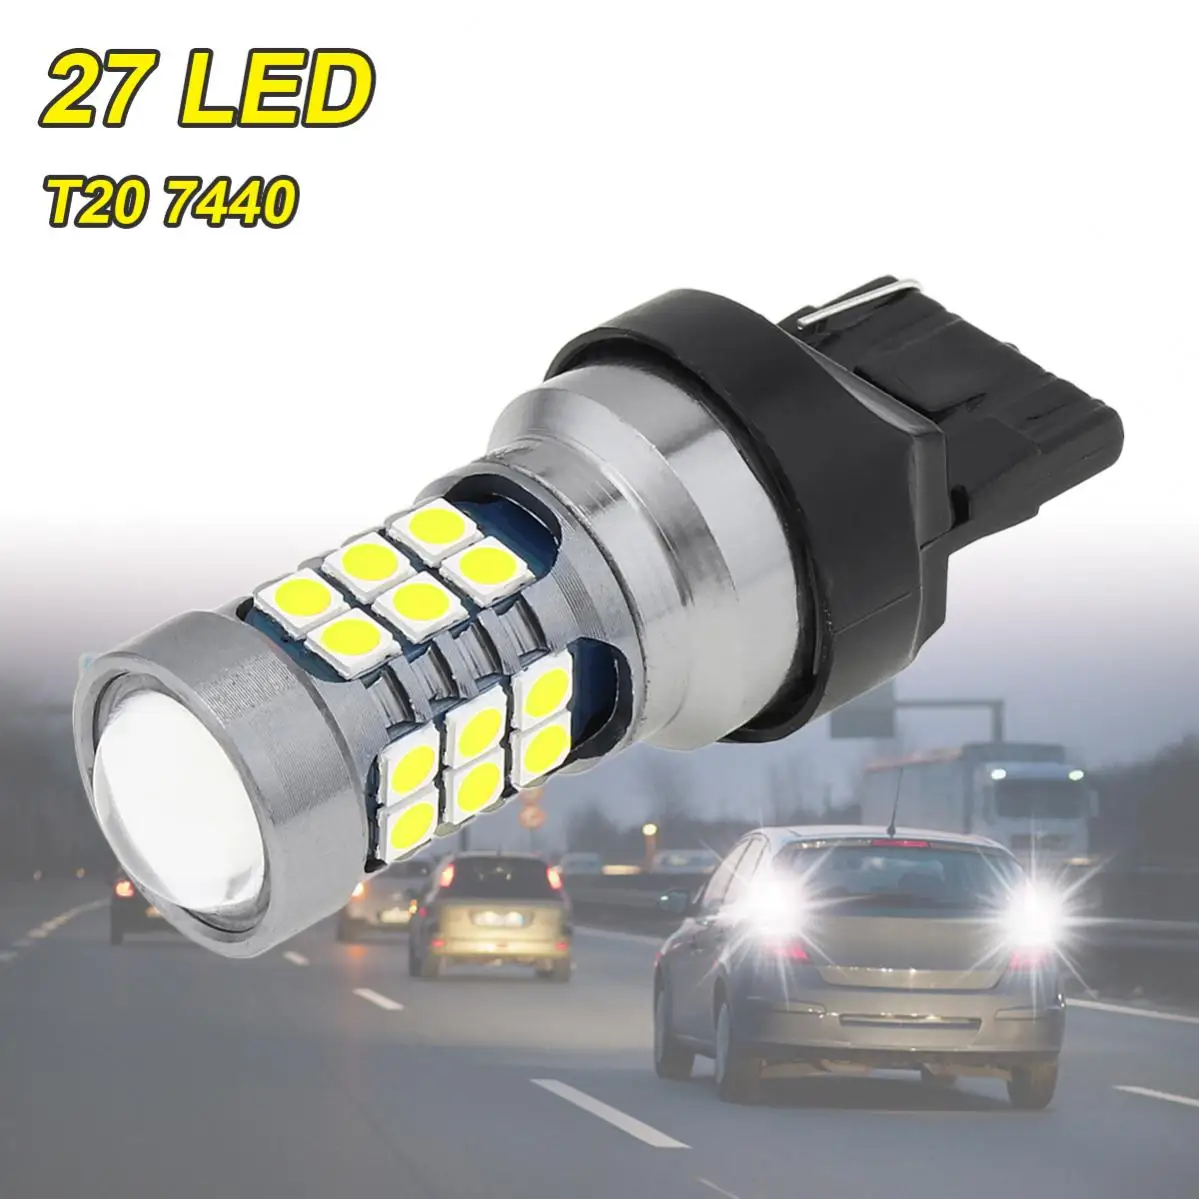 

5W 12V 3030 SMD Signal Lamp White/ Yellow / Red Color T20 7440 WY21W W21W Led Bulbs Reversing Lights Turn Brake Backup Light